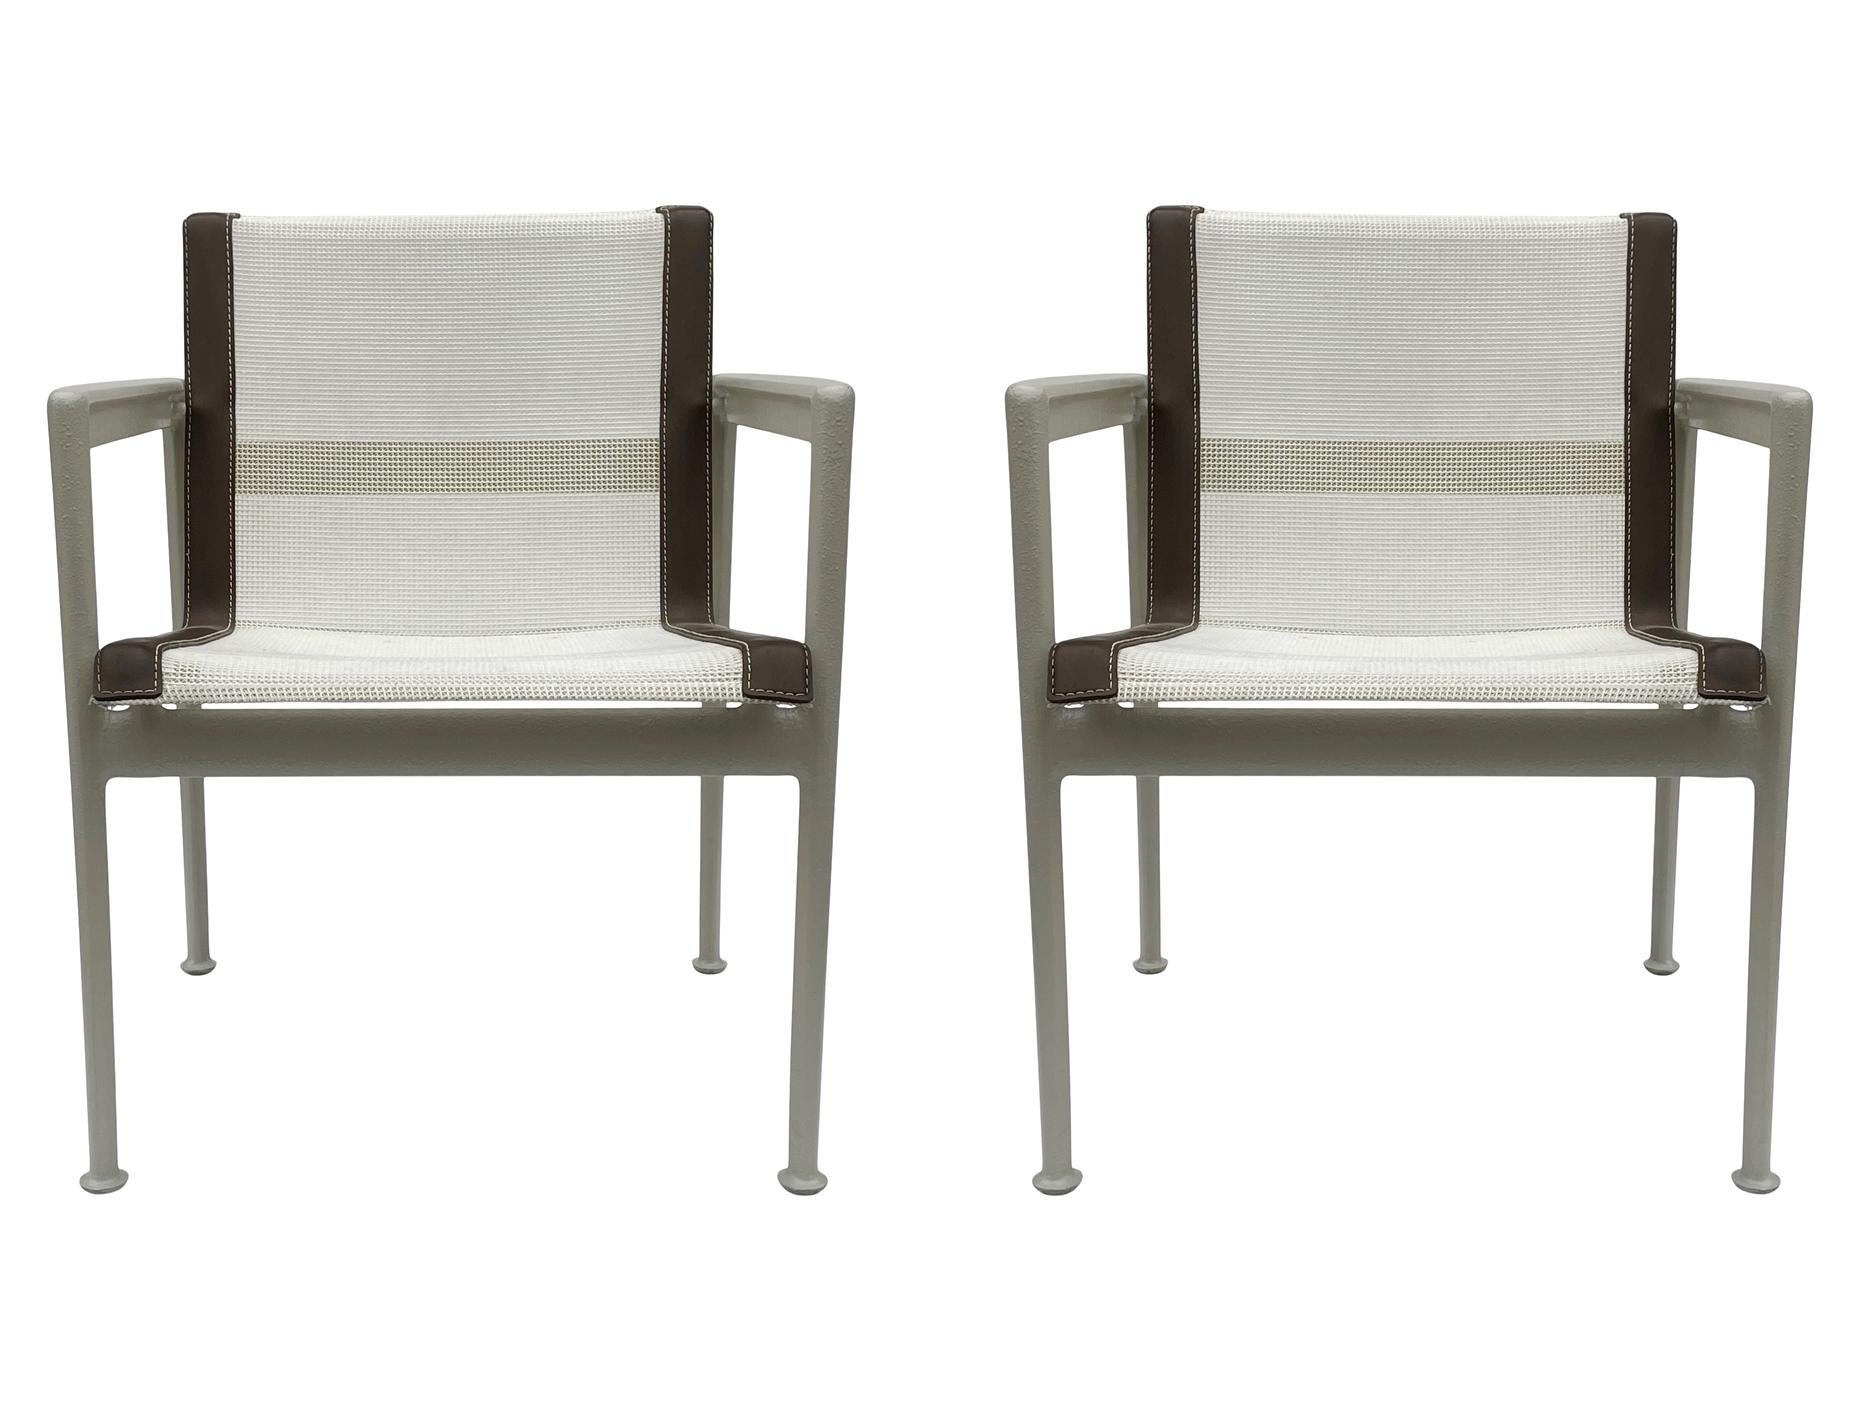 Late 20th Century Matching Pair of Mid-Century Modern Outdoor Patio Armchairs by Richard Schultz